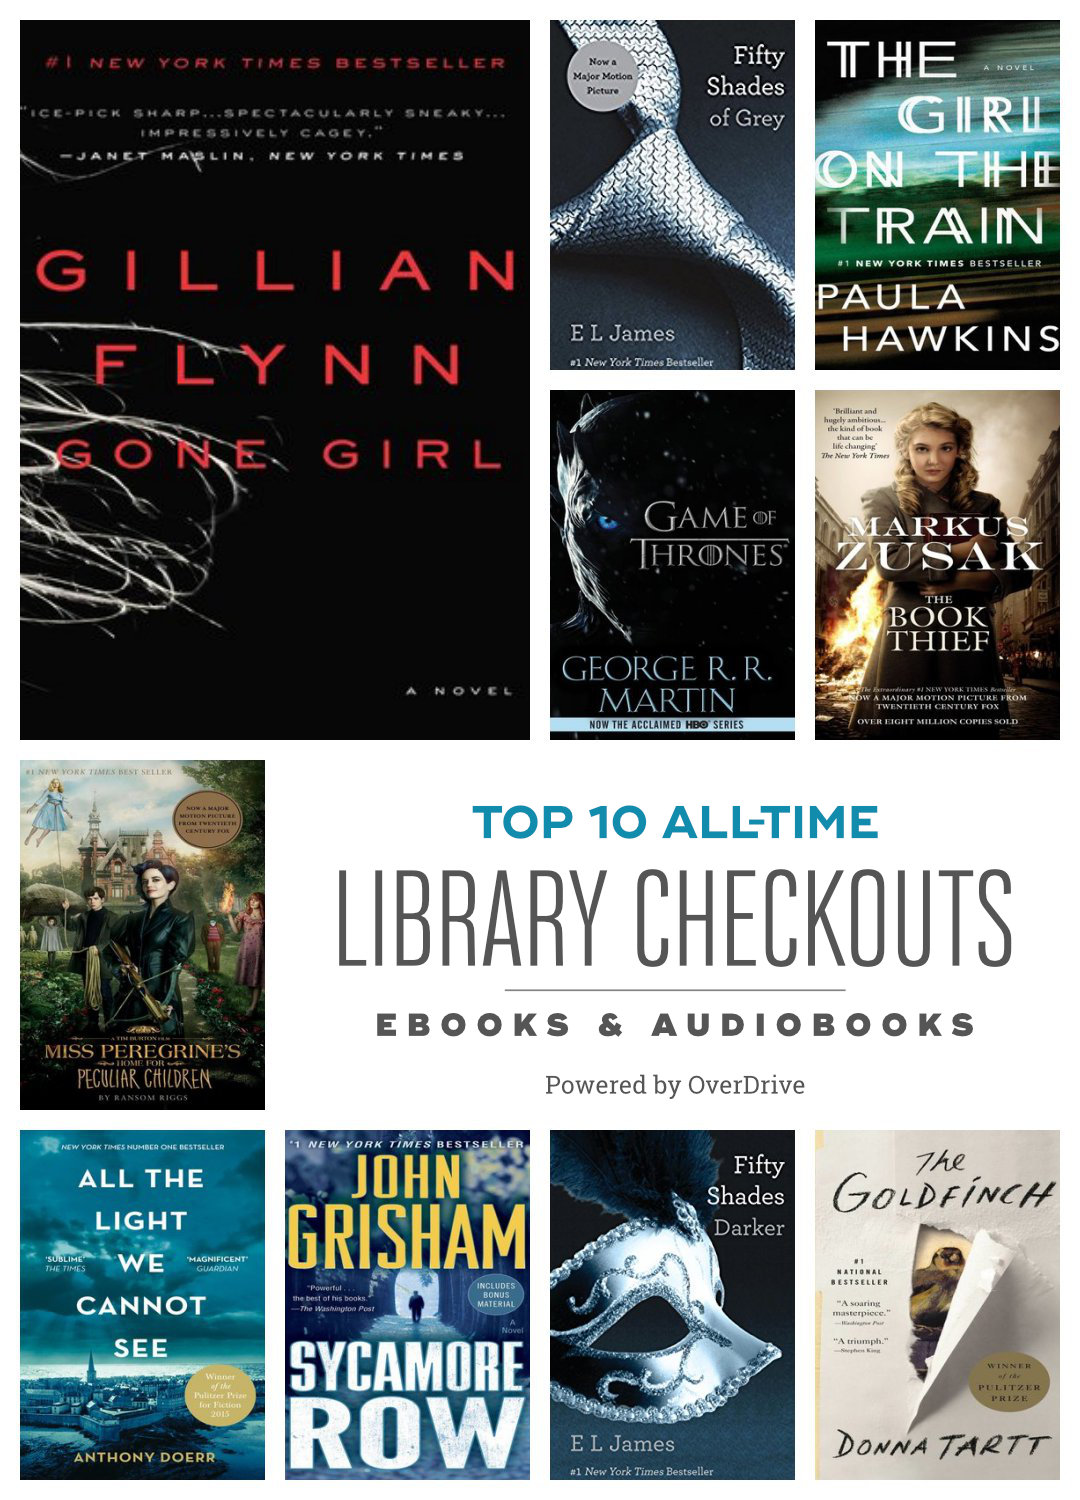 Are Best Selling Audiobooks Available for Borrowing in Libraries?